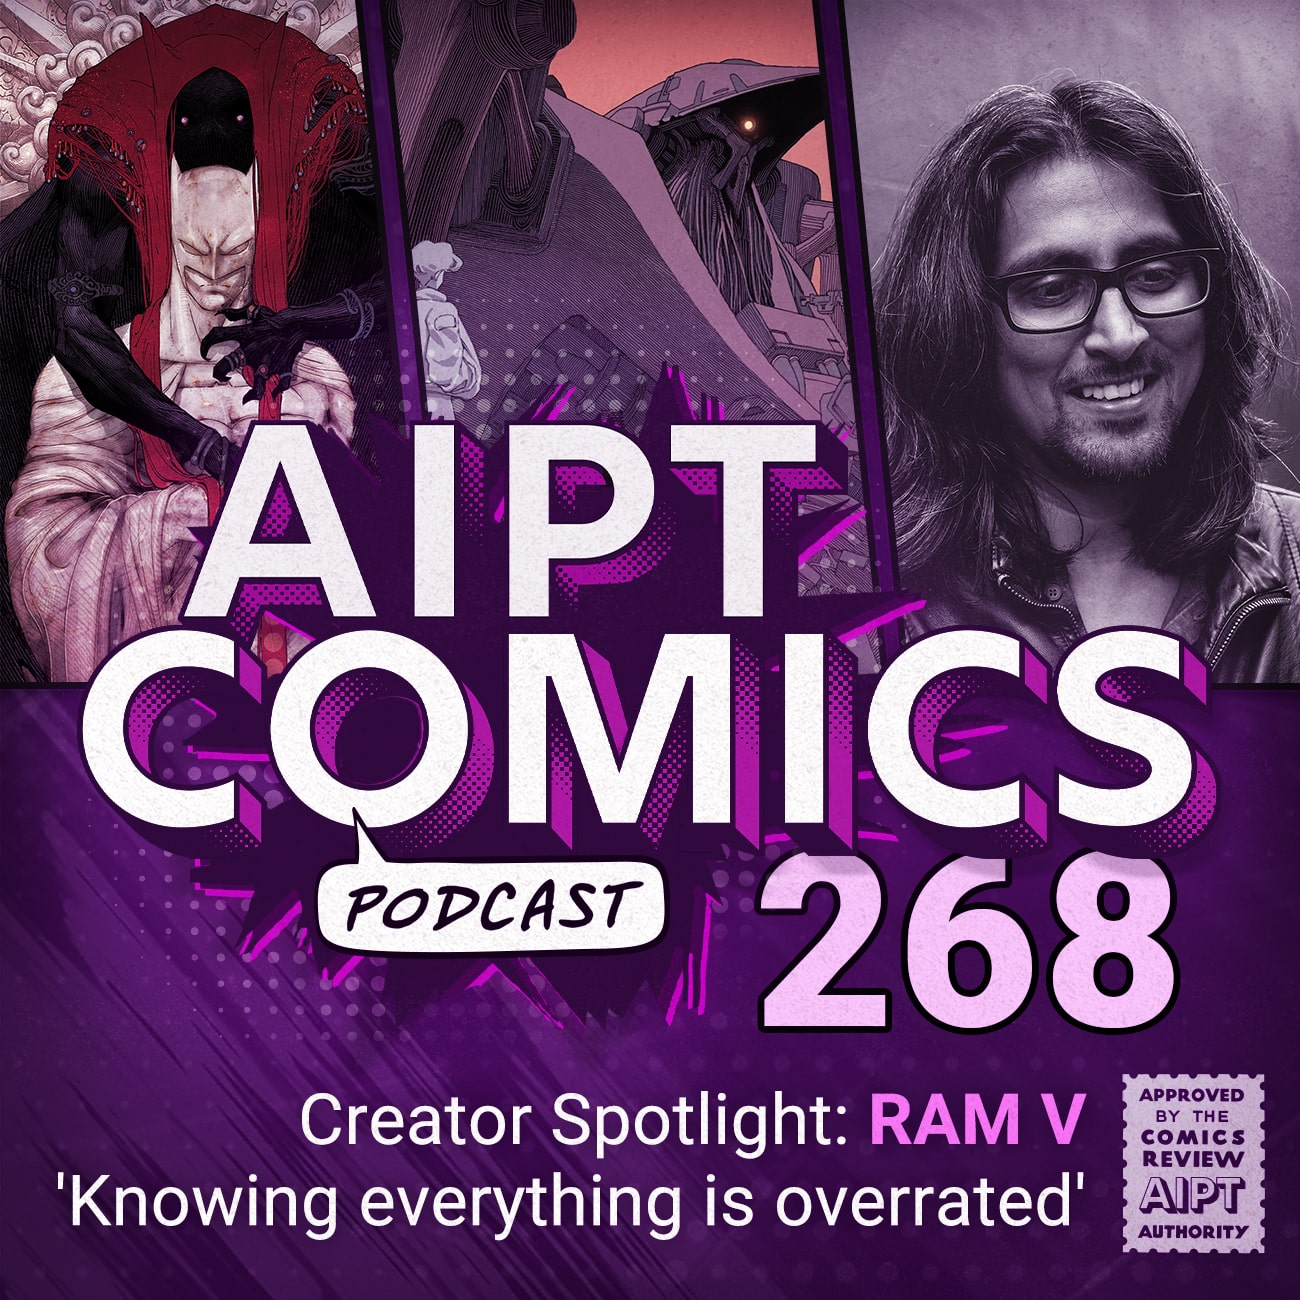 AIPT Comics Podcast Episode 268: Creator Spotlight: Ram V 'Knowing everything is overrated'